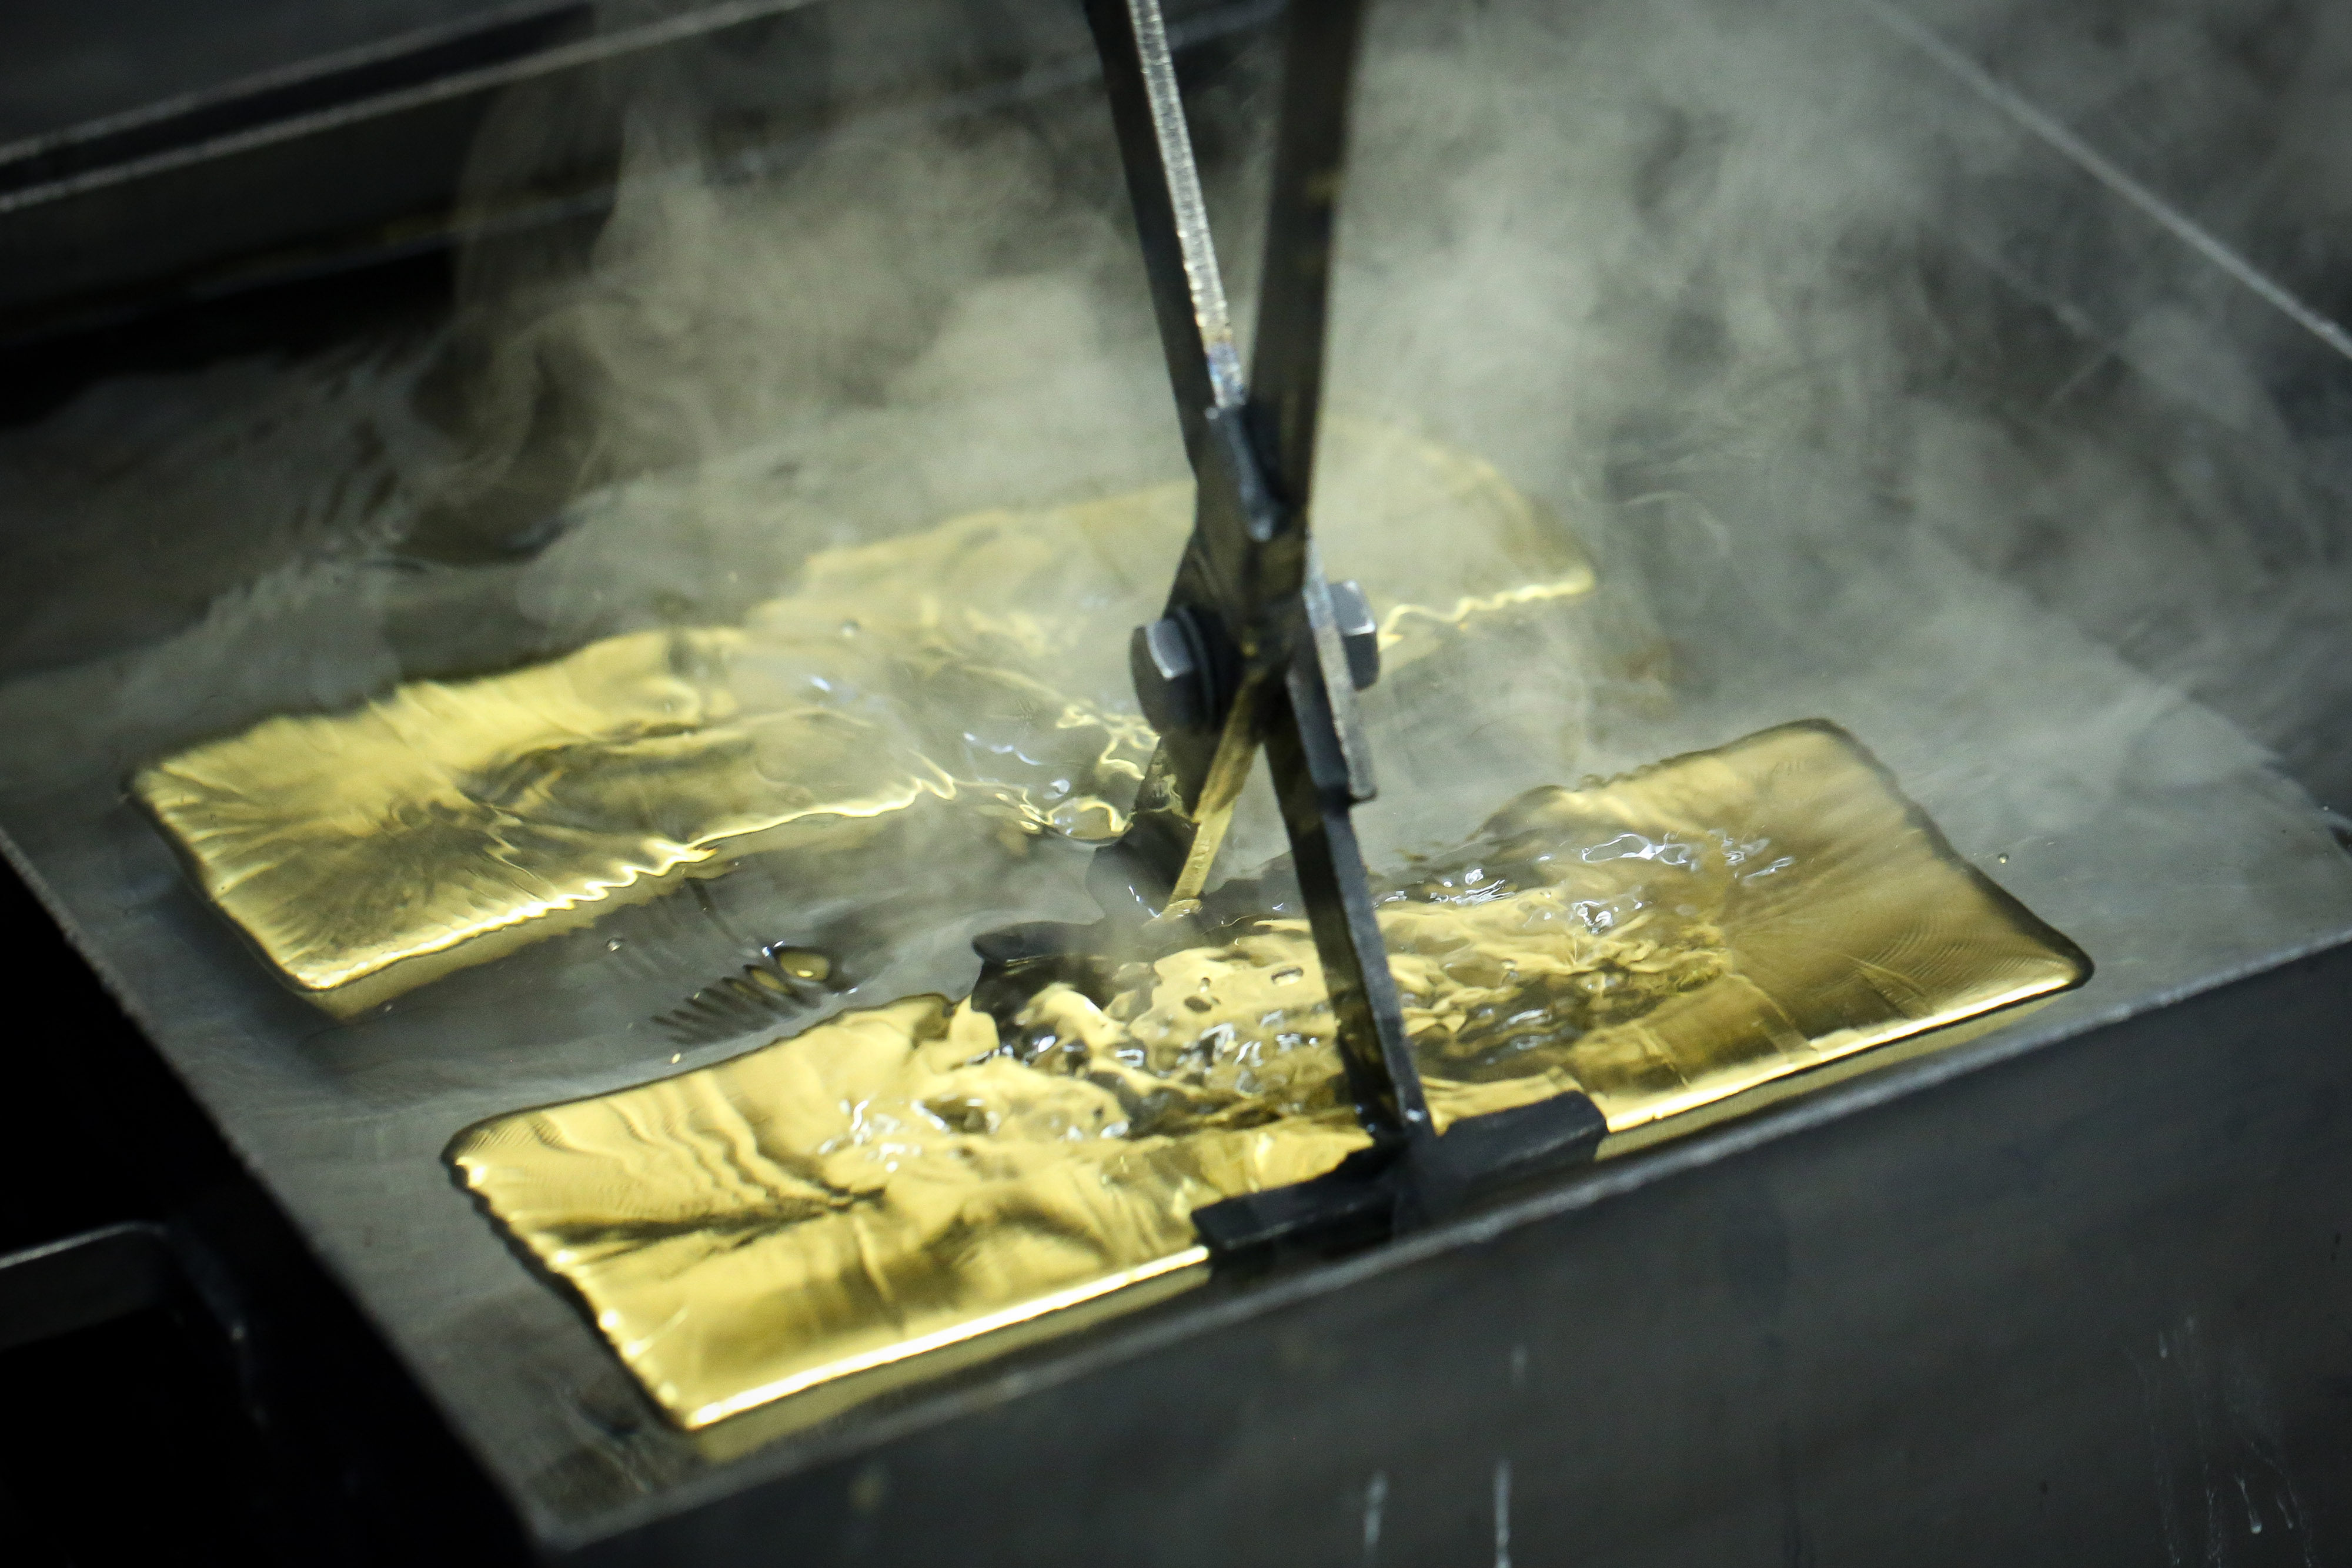 A worker plunges a gold ingot into a cooling bath at the Uralelectromed Copper Refinery, operated by Ural Mining and Metallurgical Company, in Verkhnyaya Pyshma, Russia, on July 30, 2020. Central banks are estimated to have bought more gold in the third quarter of 2022 than ever before. Photo: Bloomberg